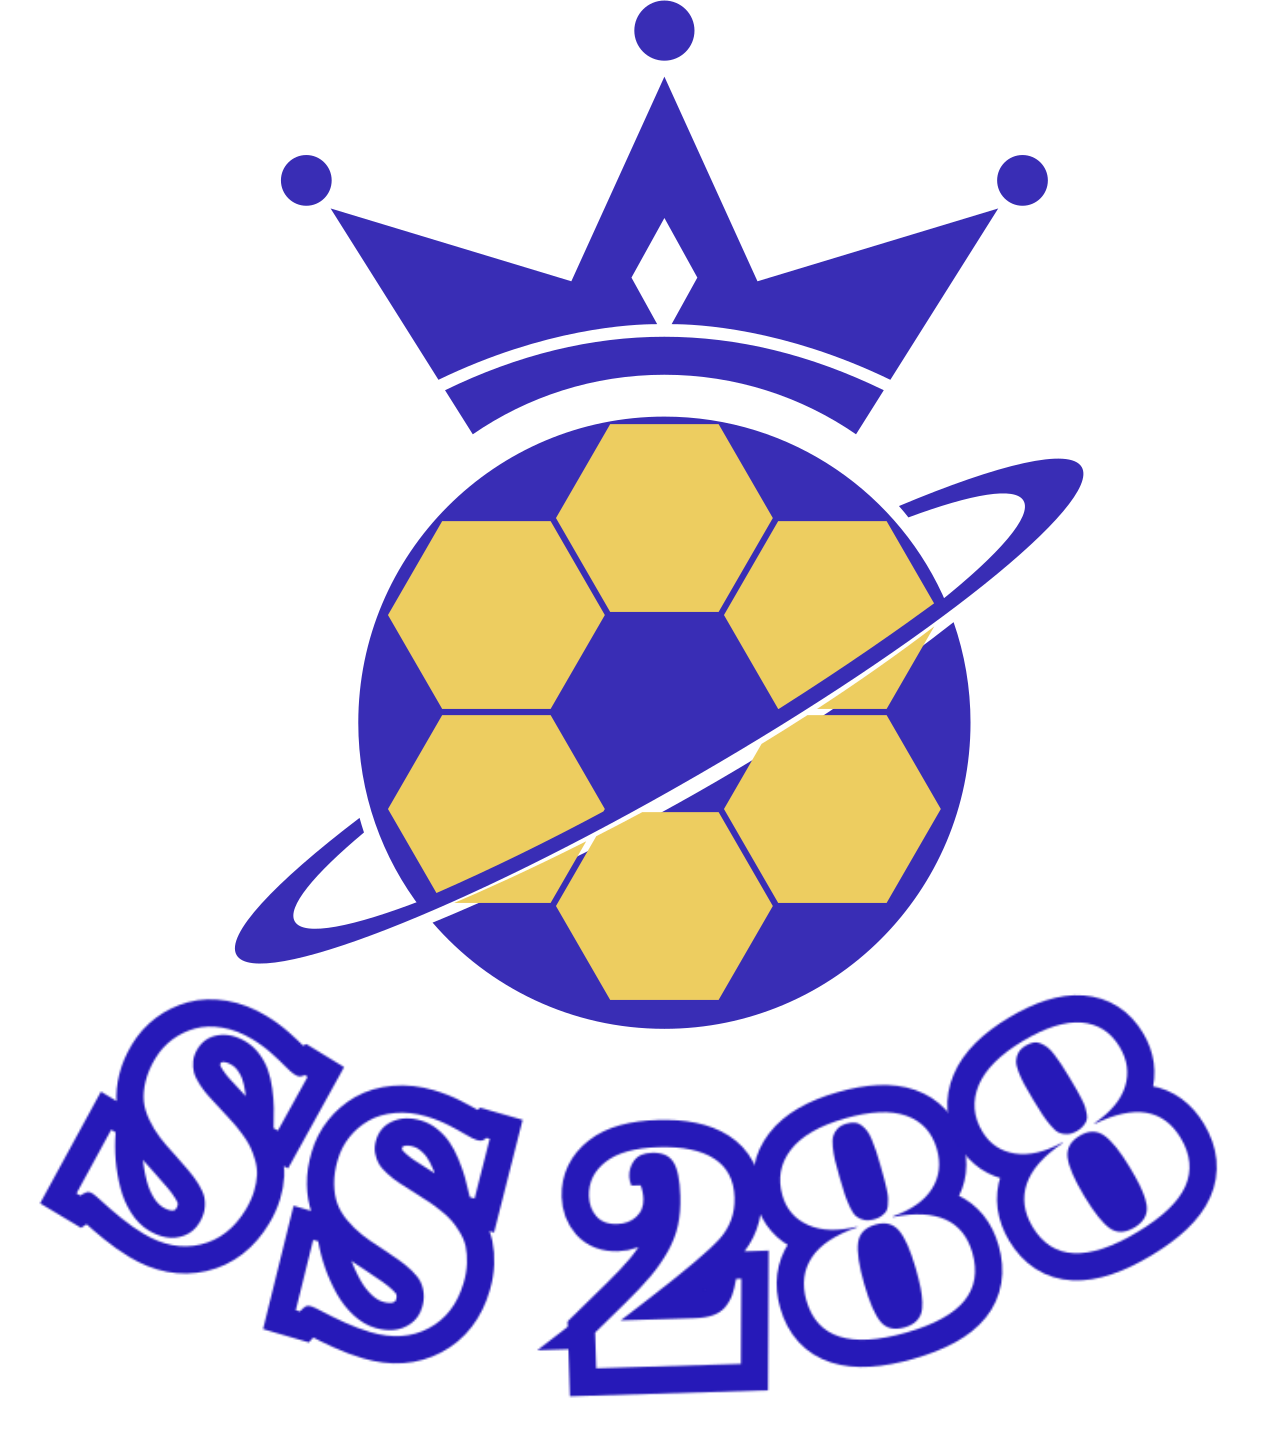 SS 288's web page